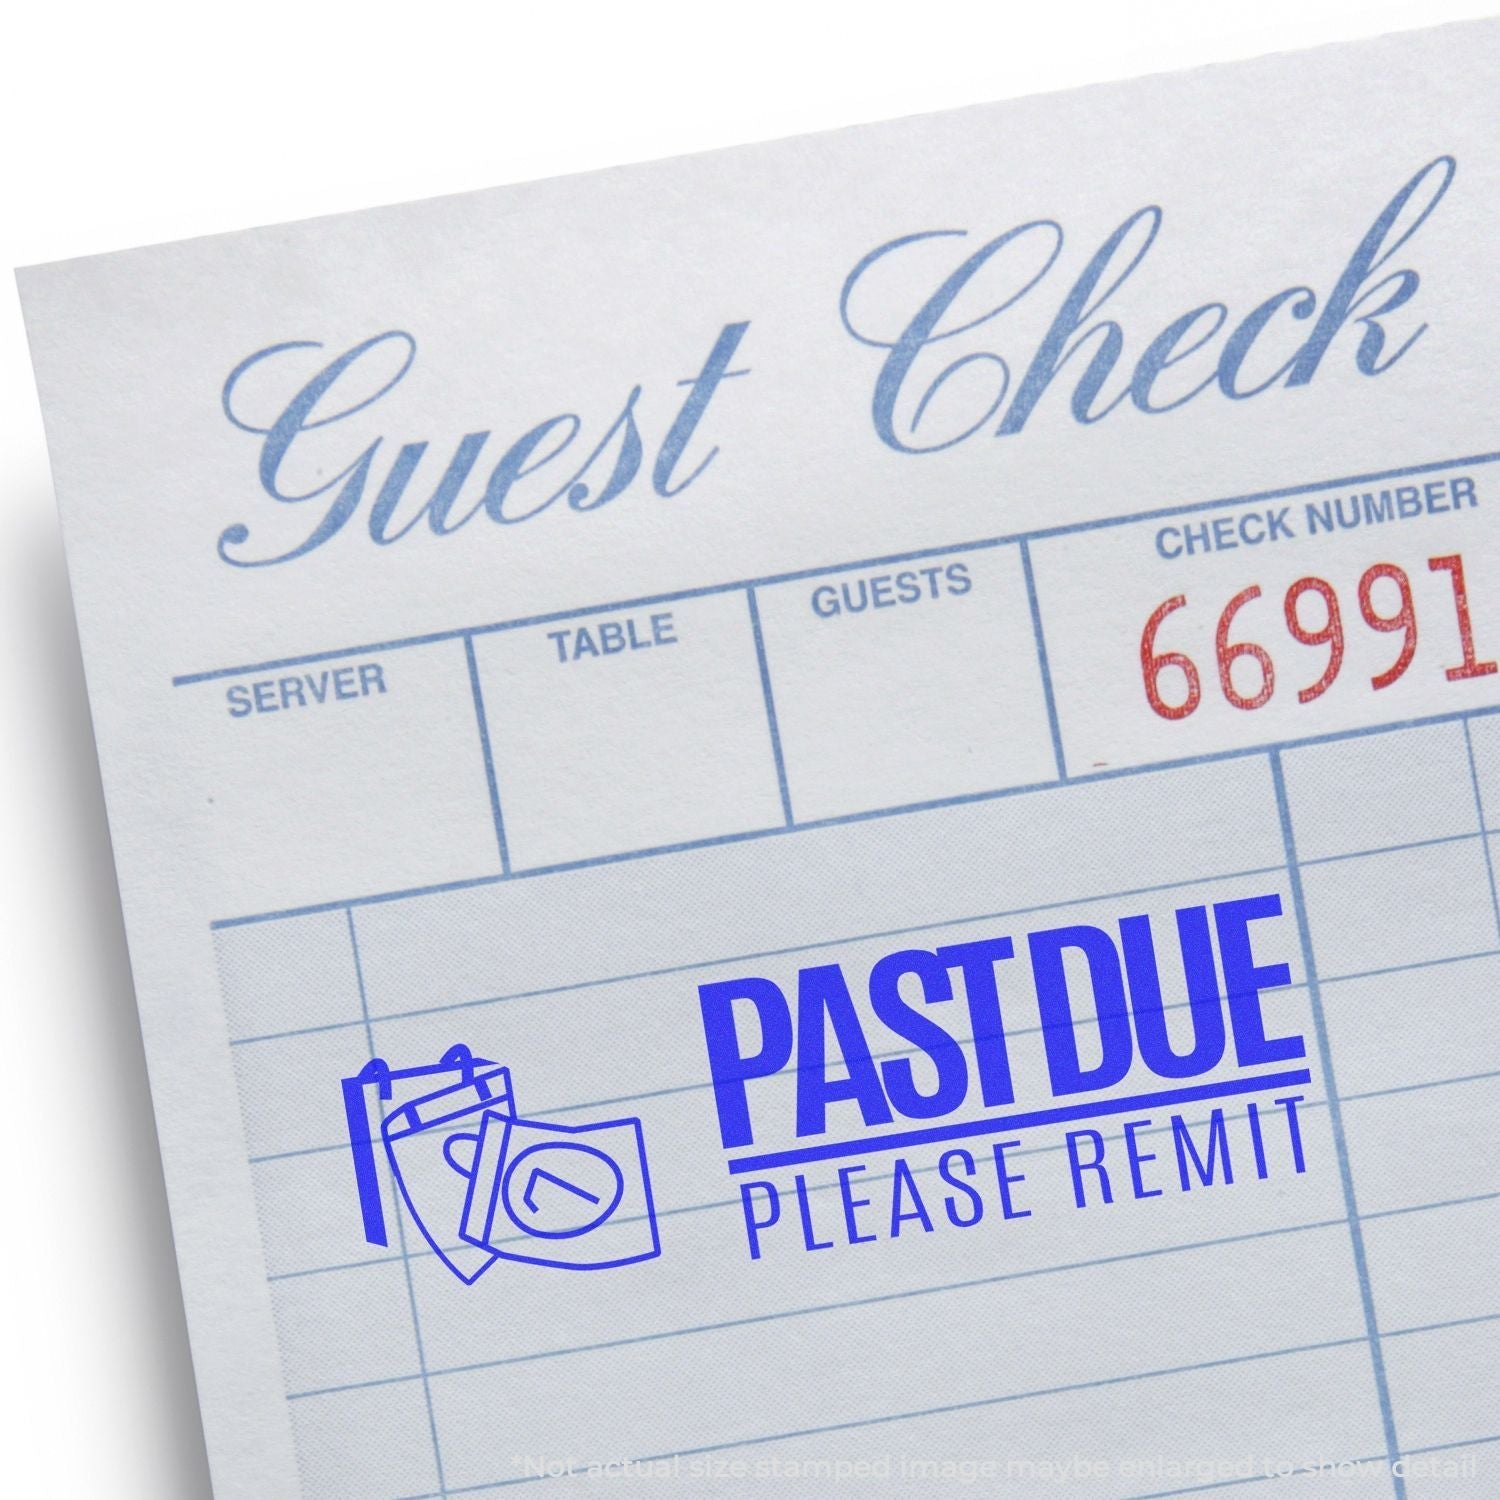 A self-inking stamp with a stamped image showing how the text "PAST DUE PLEASE REMIT" ("PAST DUE" in a bold font with a line underneath and "PLEASE REMIT" in narrow font under the line) with an icon of a calendar is displayed after stamping.